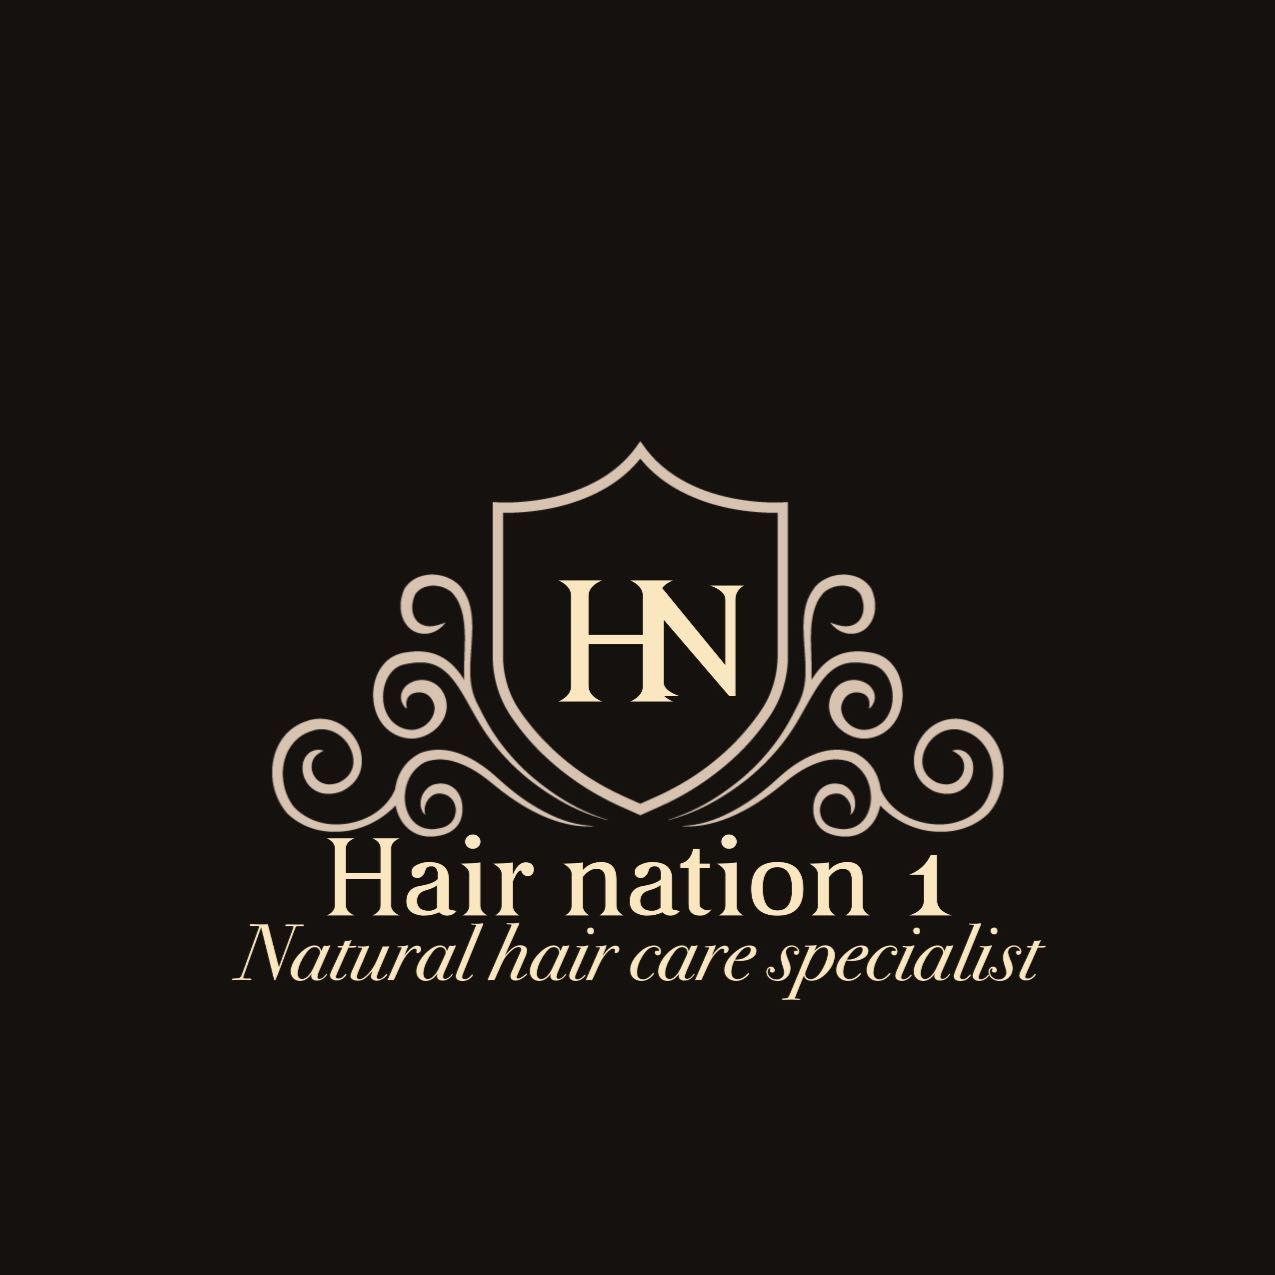 Hair nation by felie. ( African Braiding / Natural Hair Specialist), 3980 Southside Blvd, Unit 209, 209, Jacksonville, 32216